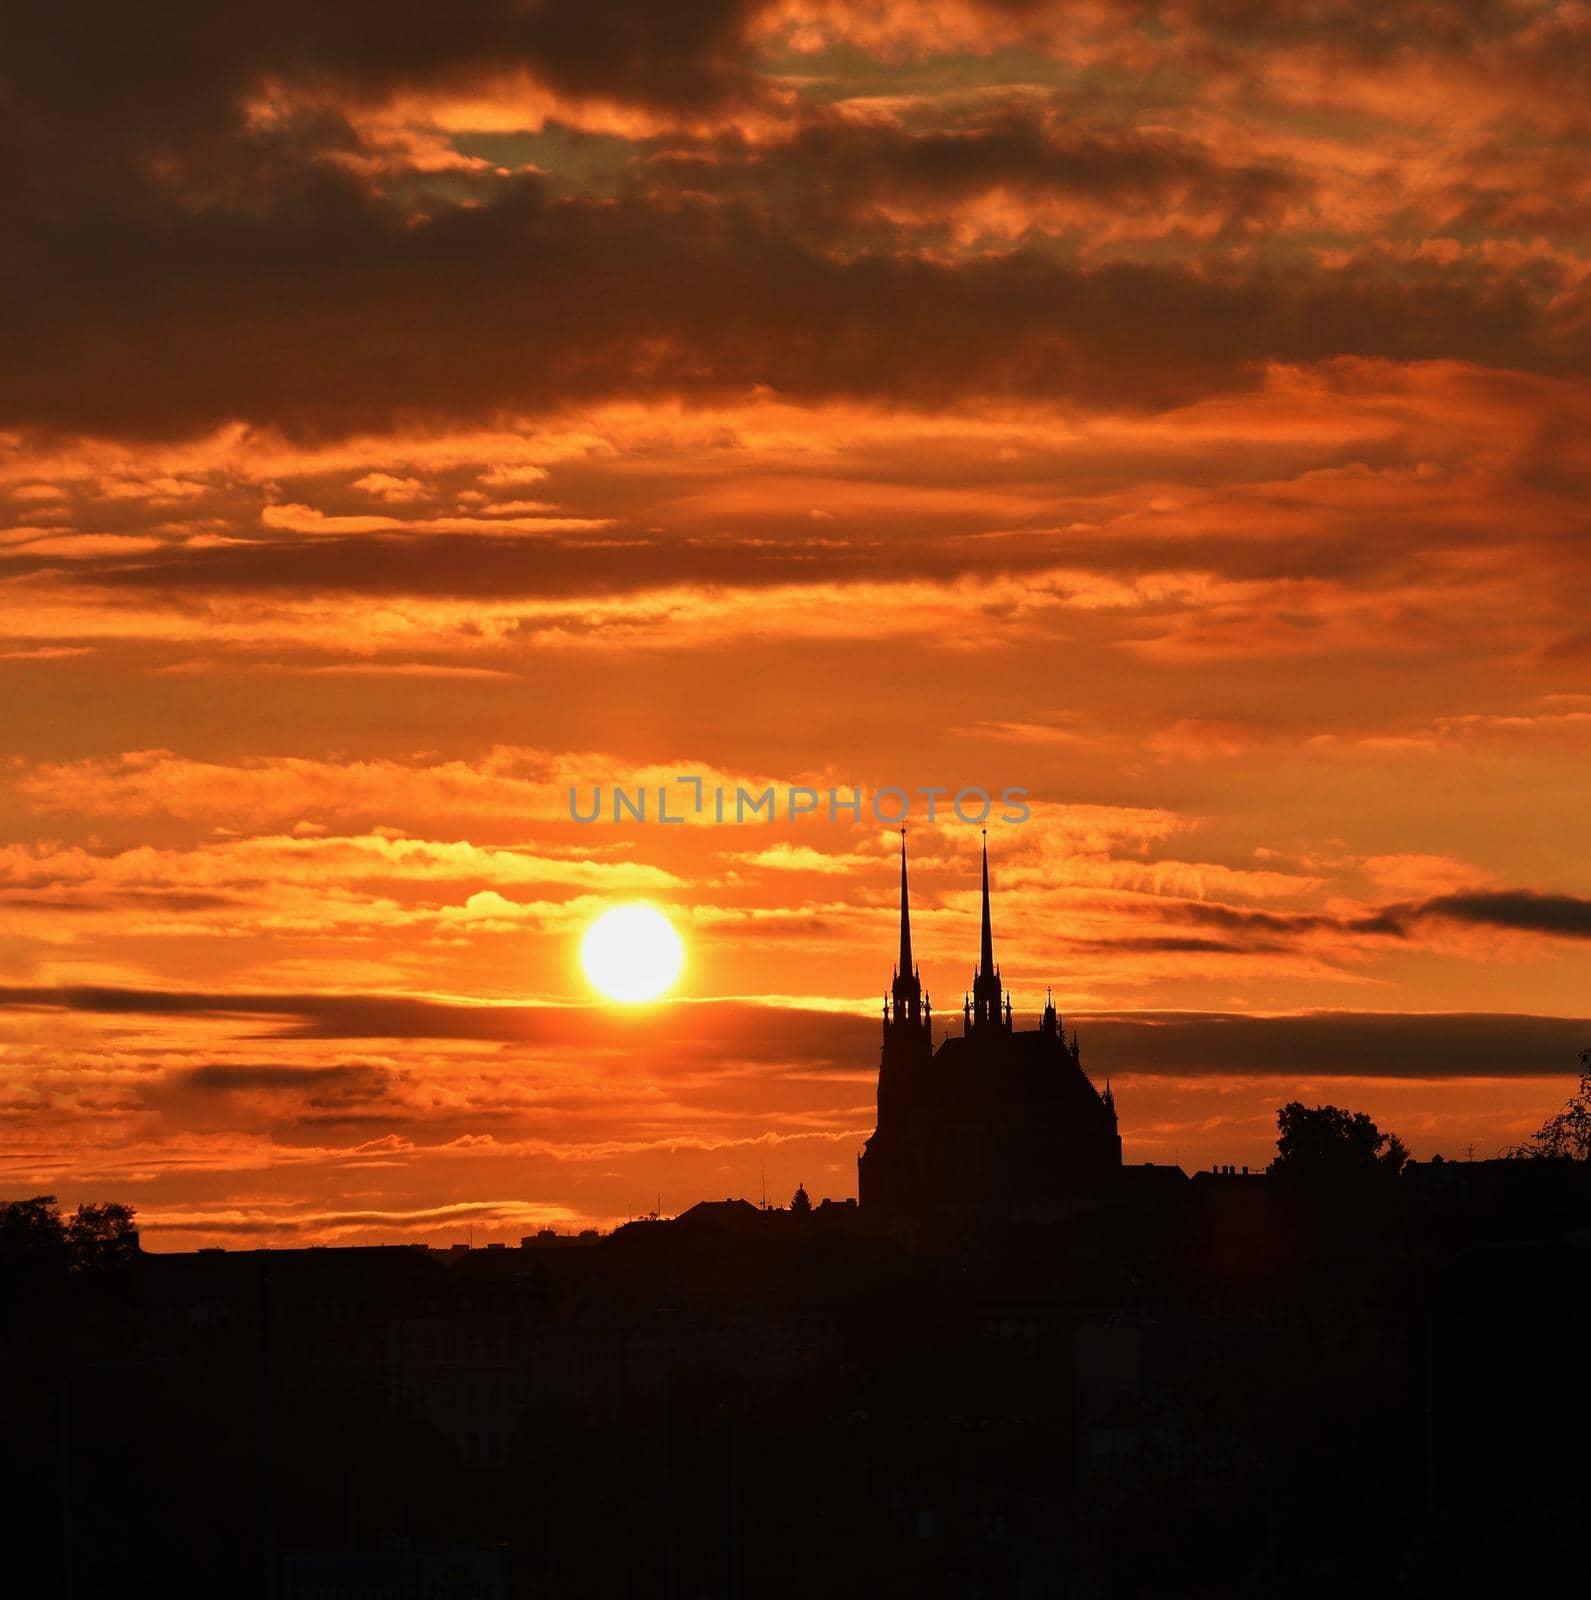 City of Brno, Czech Republic. Petrov - St. Peters and Paul church in sunset - sunrise. by Montypeter